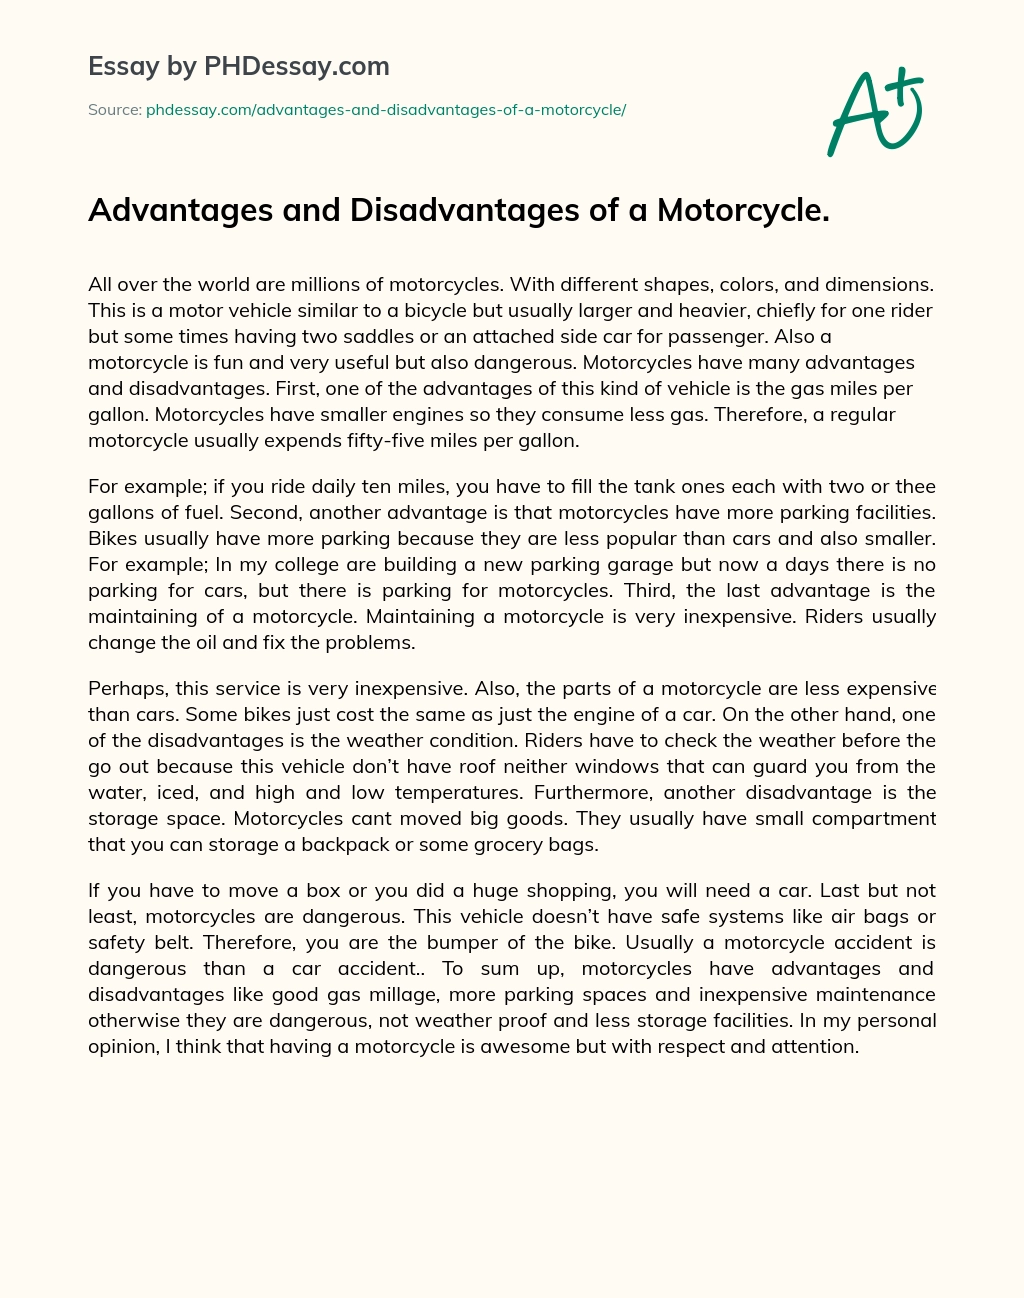 Advantages and Disadvantages of a Motorcycle. essay